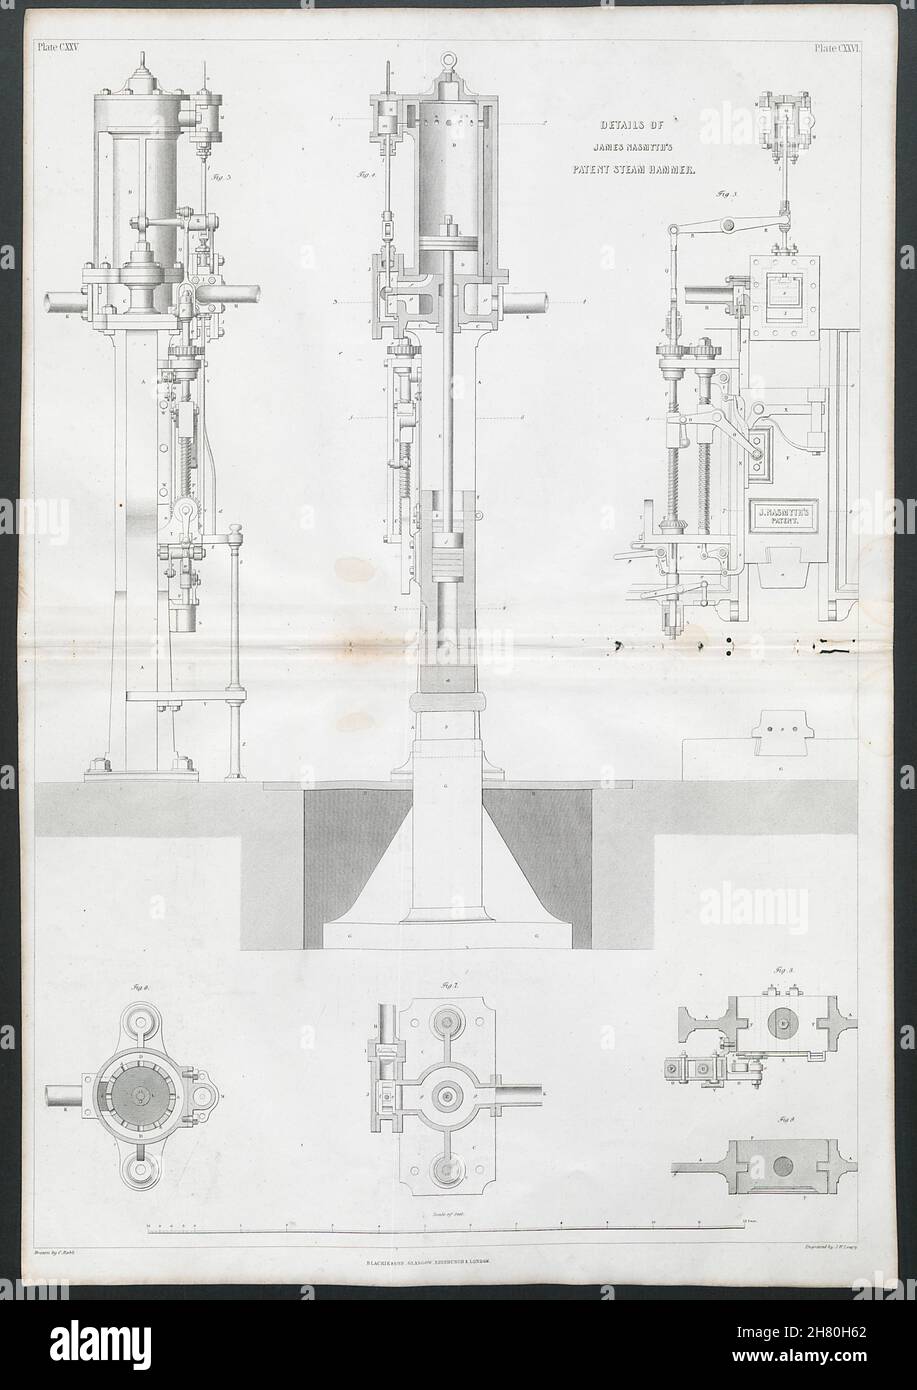 VICTORIAN ENGINEERING DRAWING James Nasmyth's patent steam hammer details 1847 Stock Photo